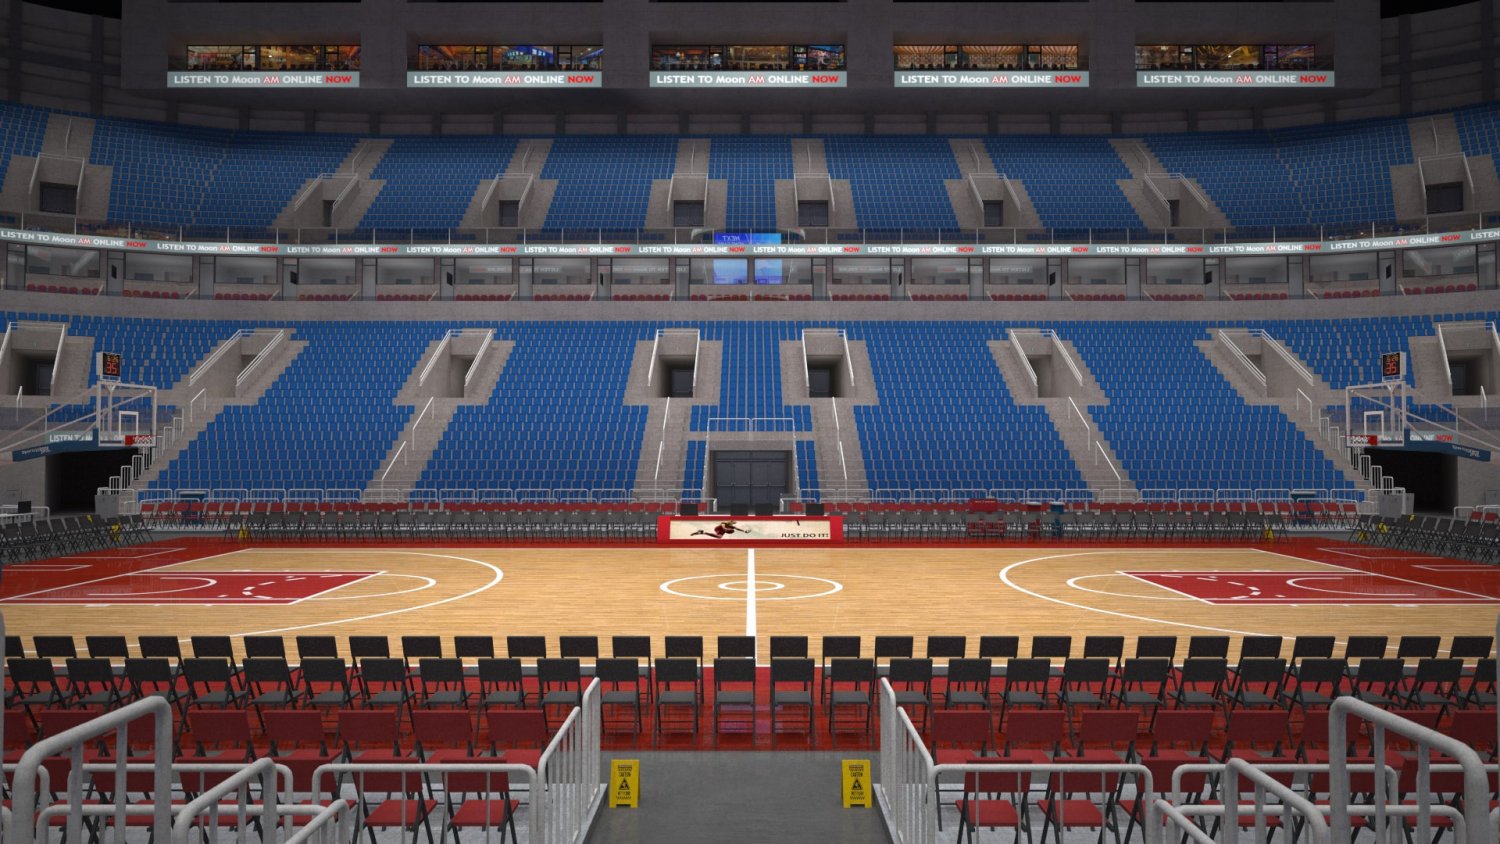 Basketball Arena: Online Game App Stats: Downloads, Users and